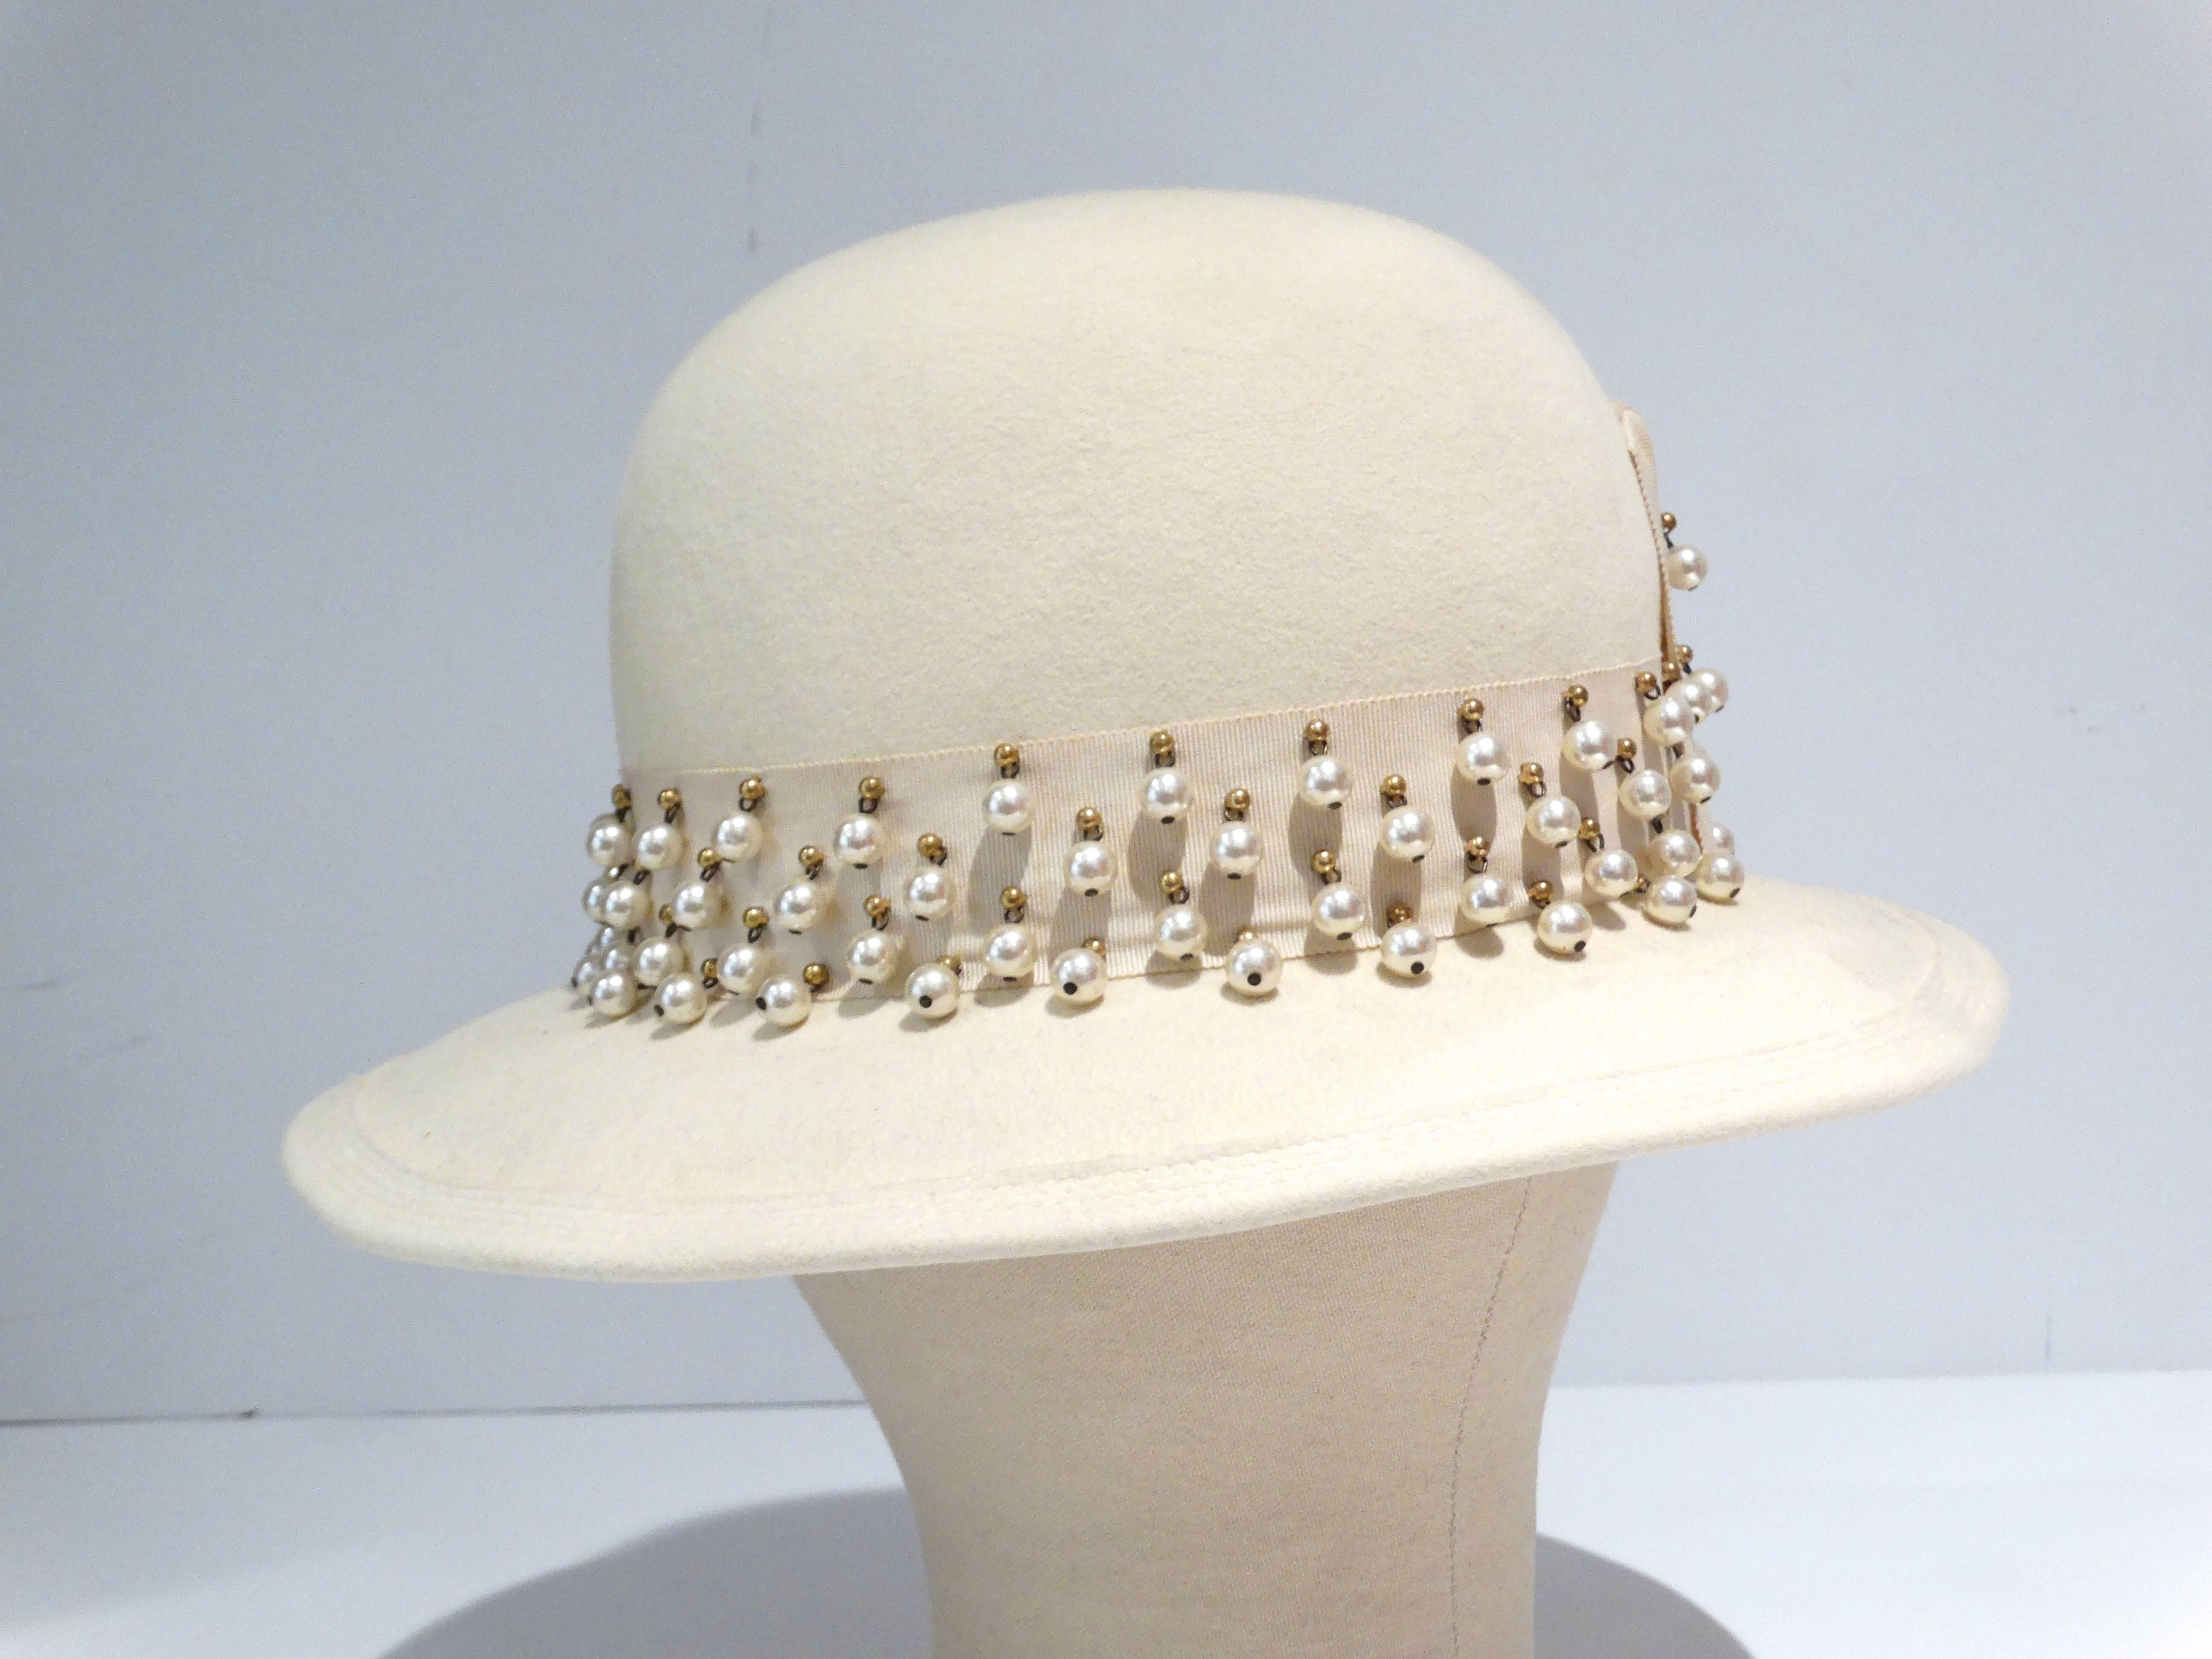 1970s YVES SAINT LAURENT derby style hat made of ivory wool velour.  The high crown is circled w/a grosgrain ribbon band trimmed w/brass studs and dangling simulated pearls.  Channel stitching around the edge of the 2 1/4